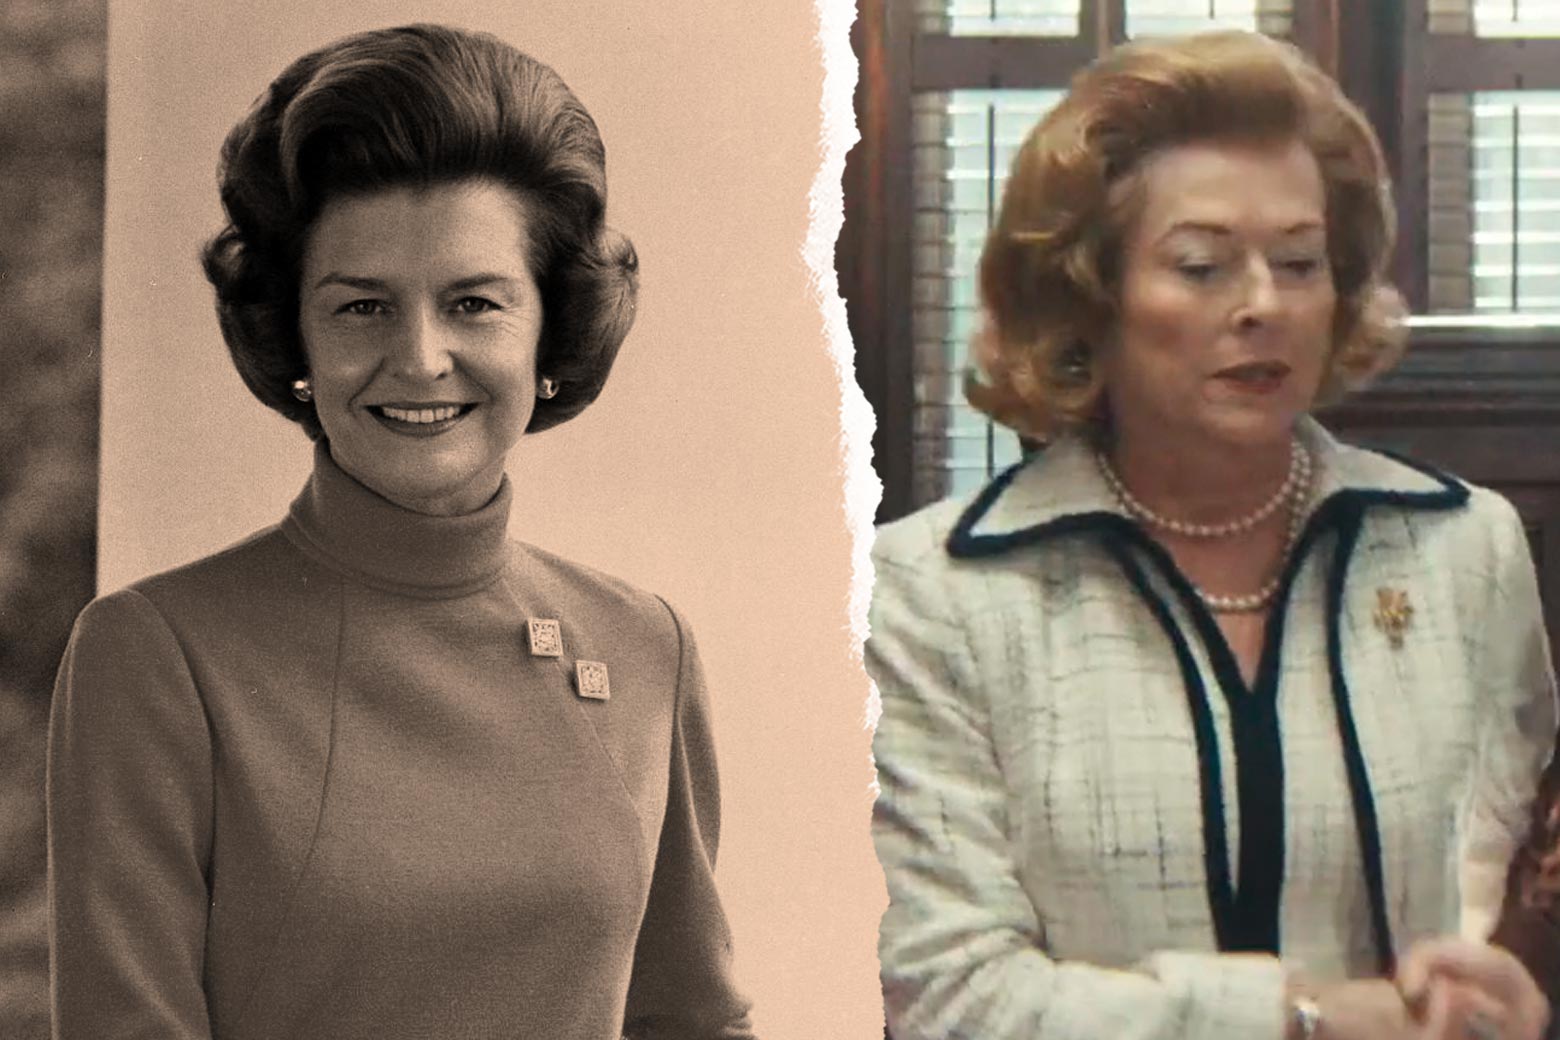 Side-by-side photos of Betty Ford and Lori Hallier as Betty Ford.